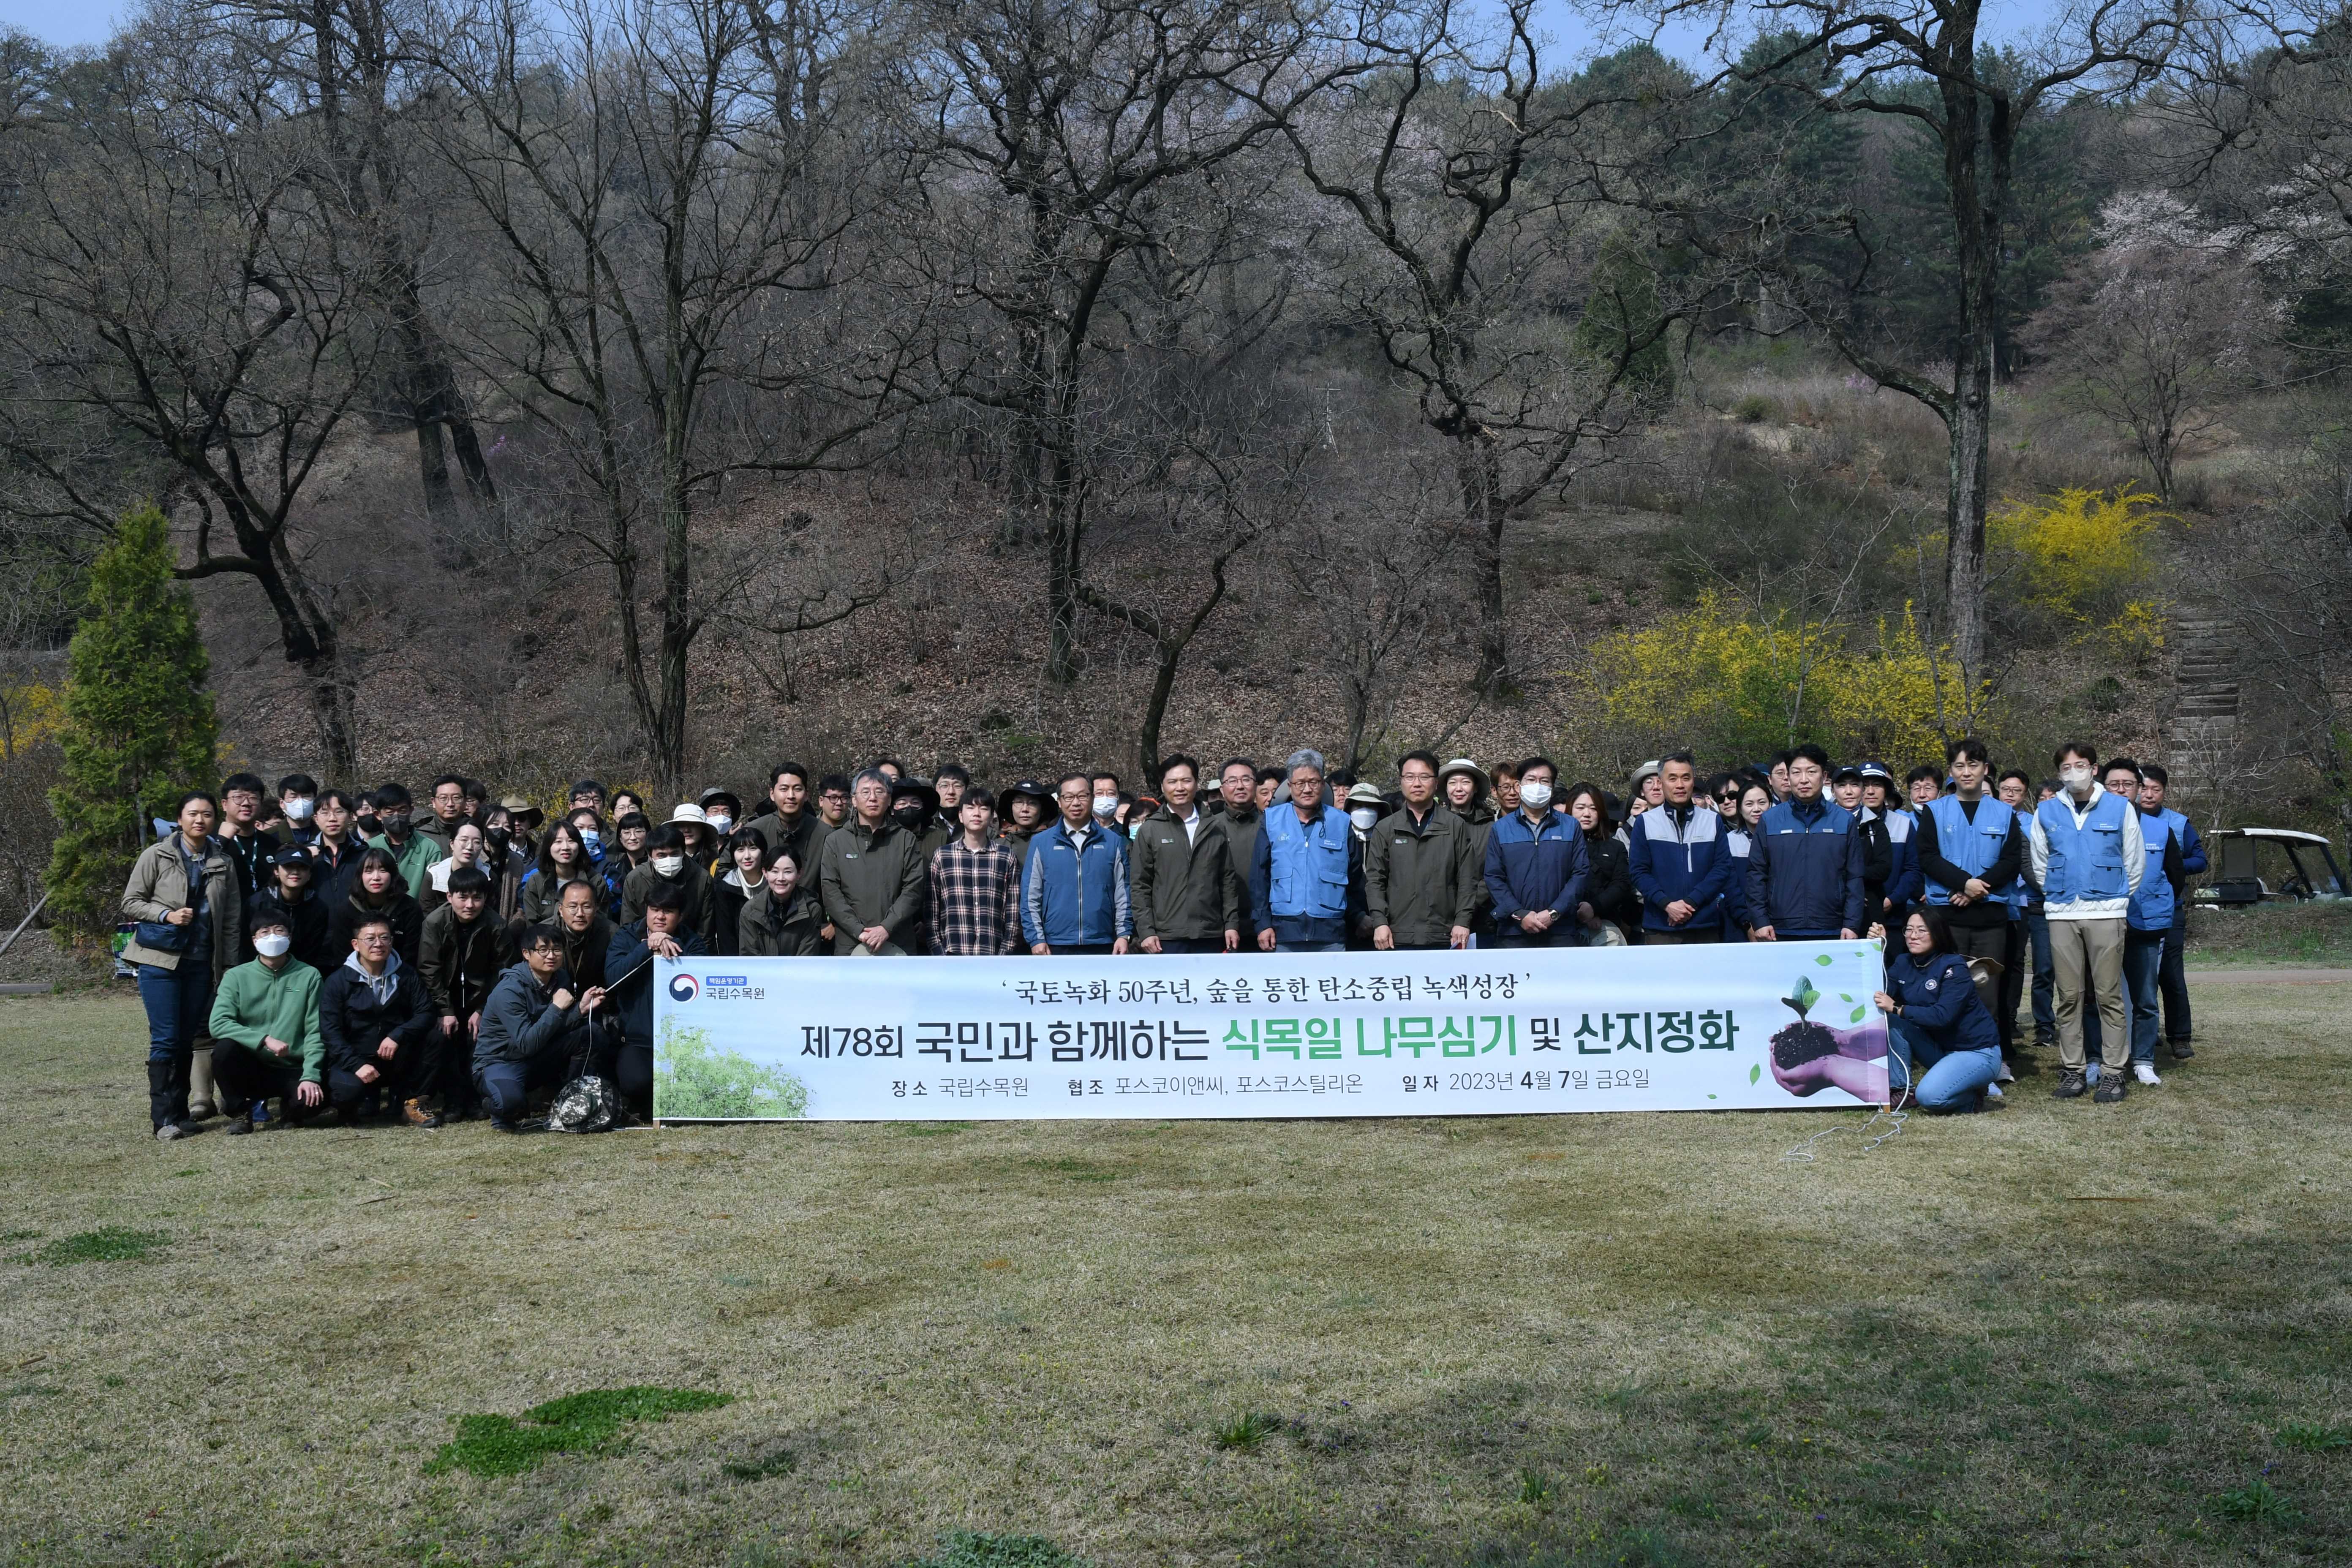 Efforts with local citizens to protect the forest 